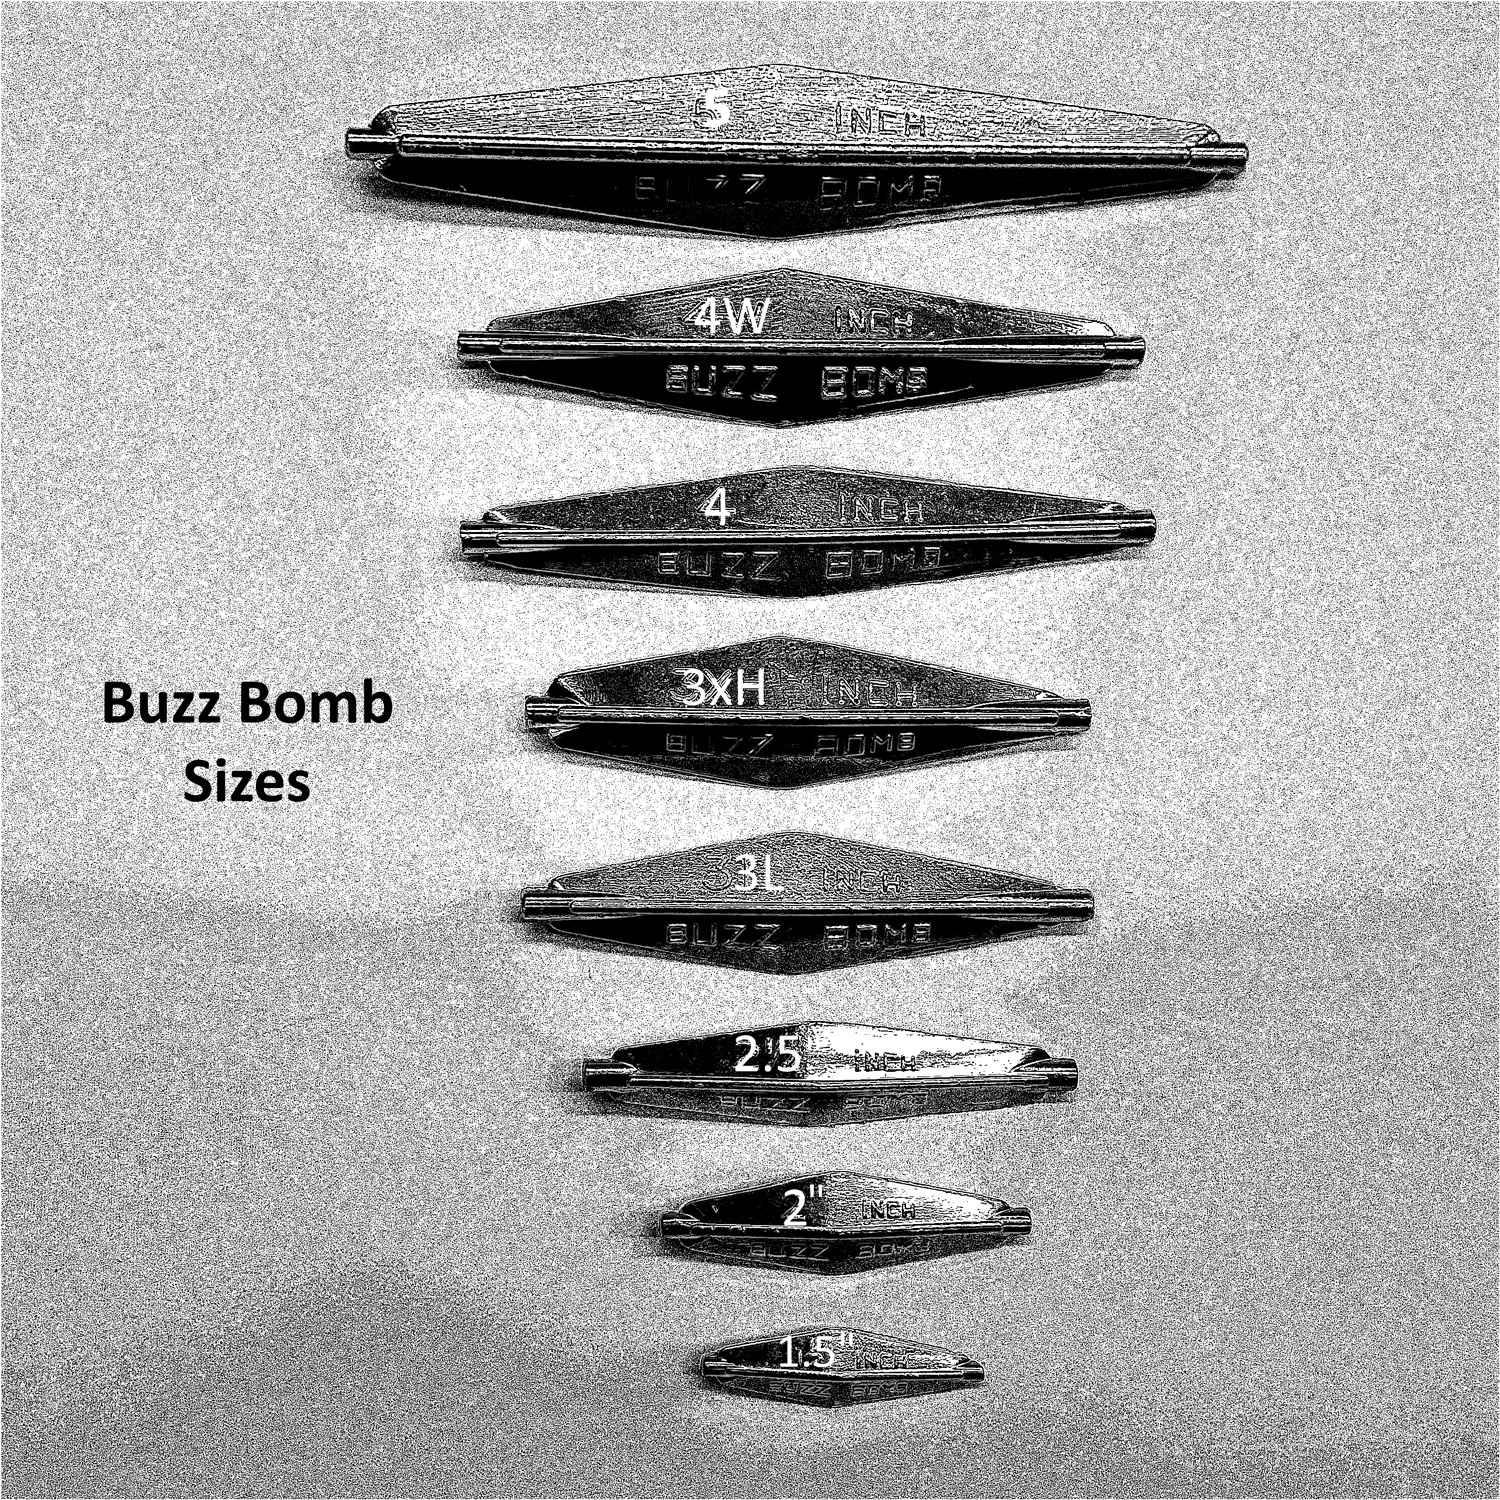 Buzz Bomb Army Issue